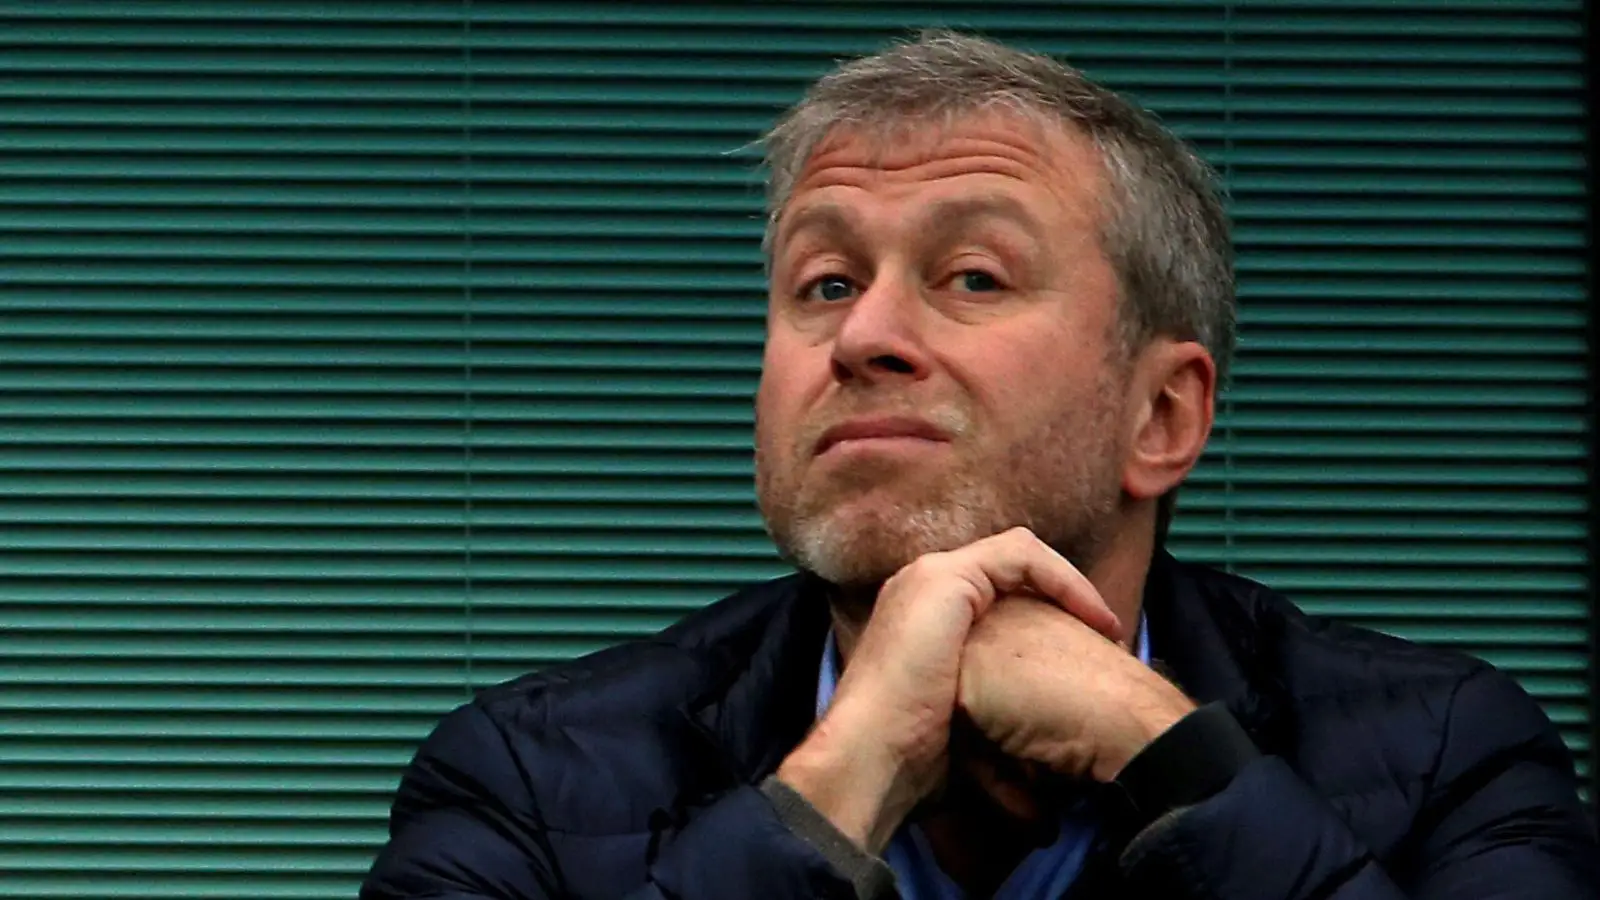 Mikel claims ex-Chelsea owner Abramovich offered to ‘send people’ to save kidnapped father